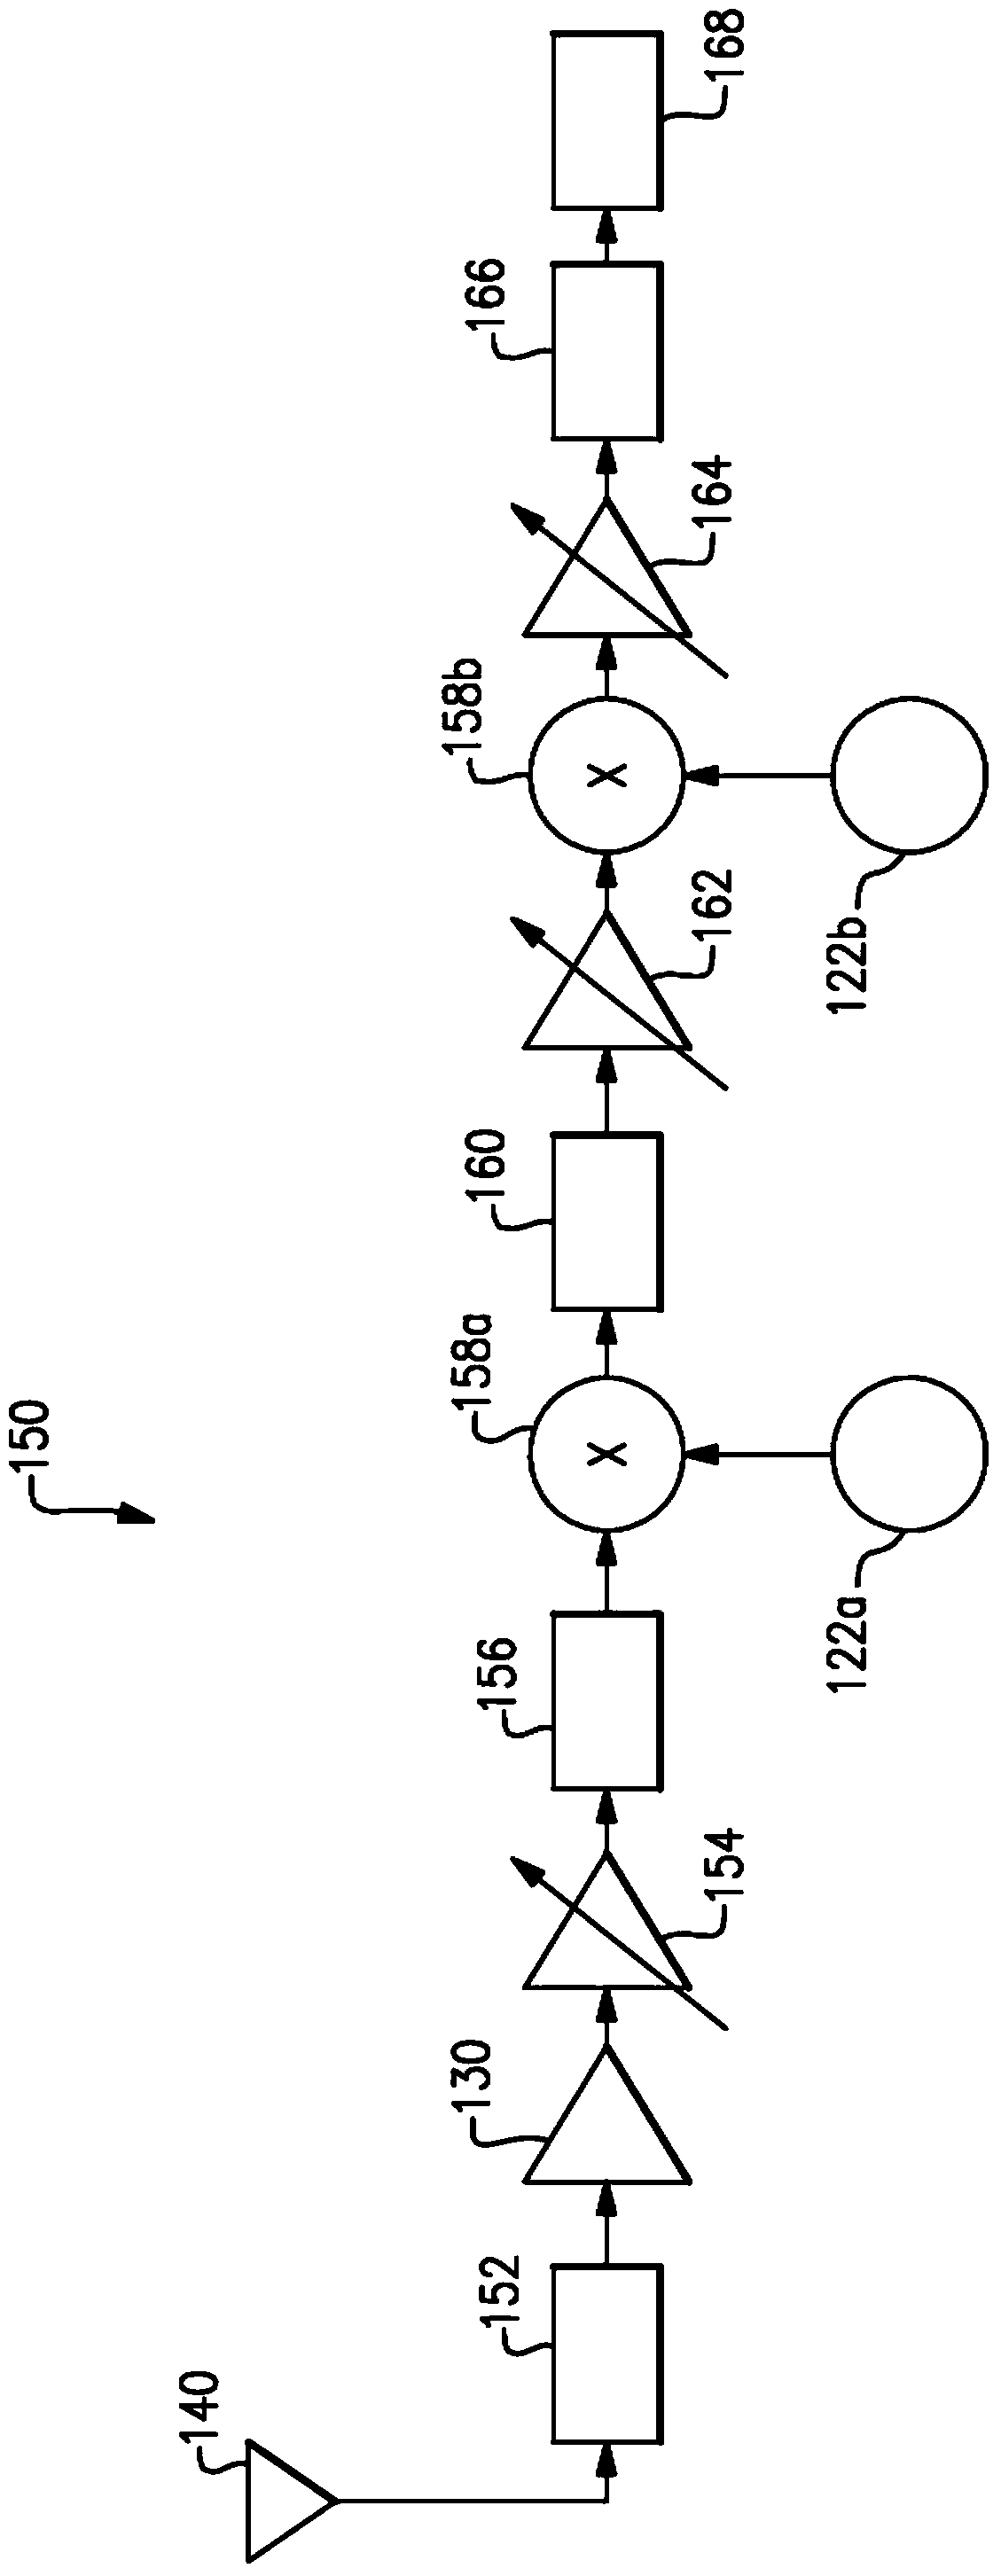 Dither-free error feedback fractional-n frequency synthesizer system and method